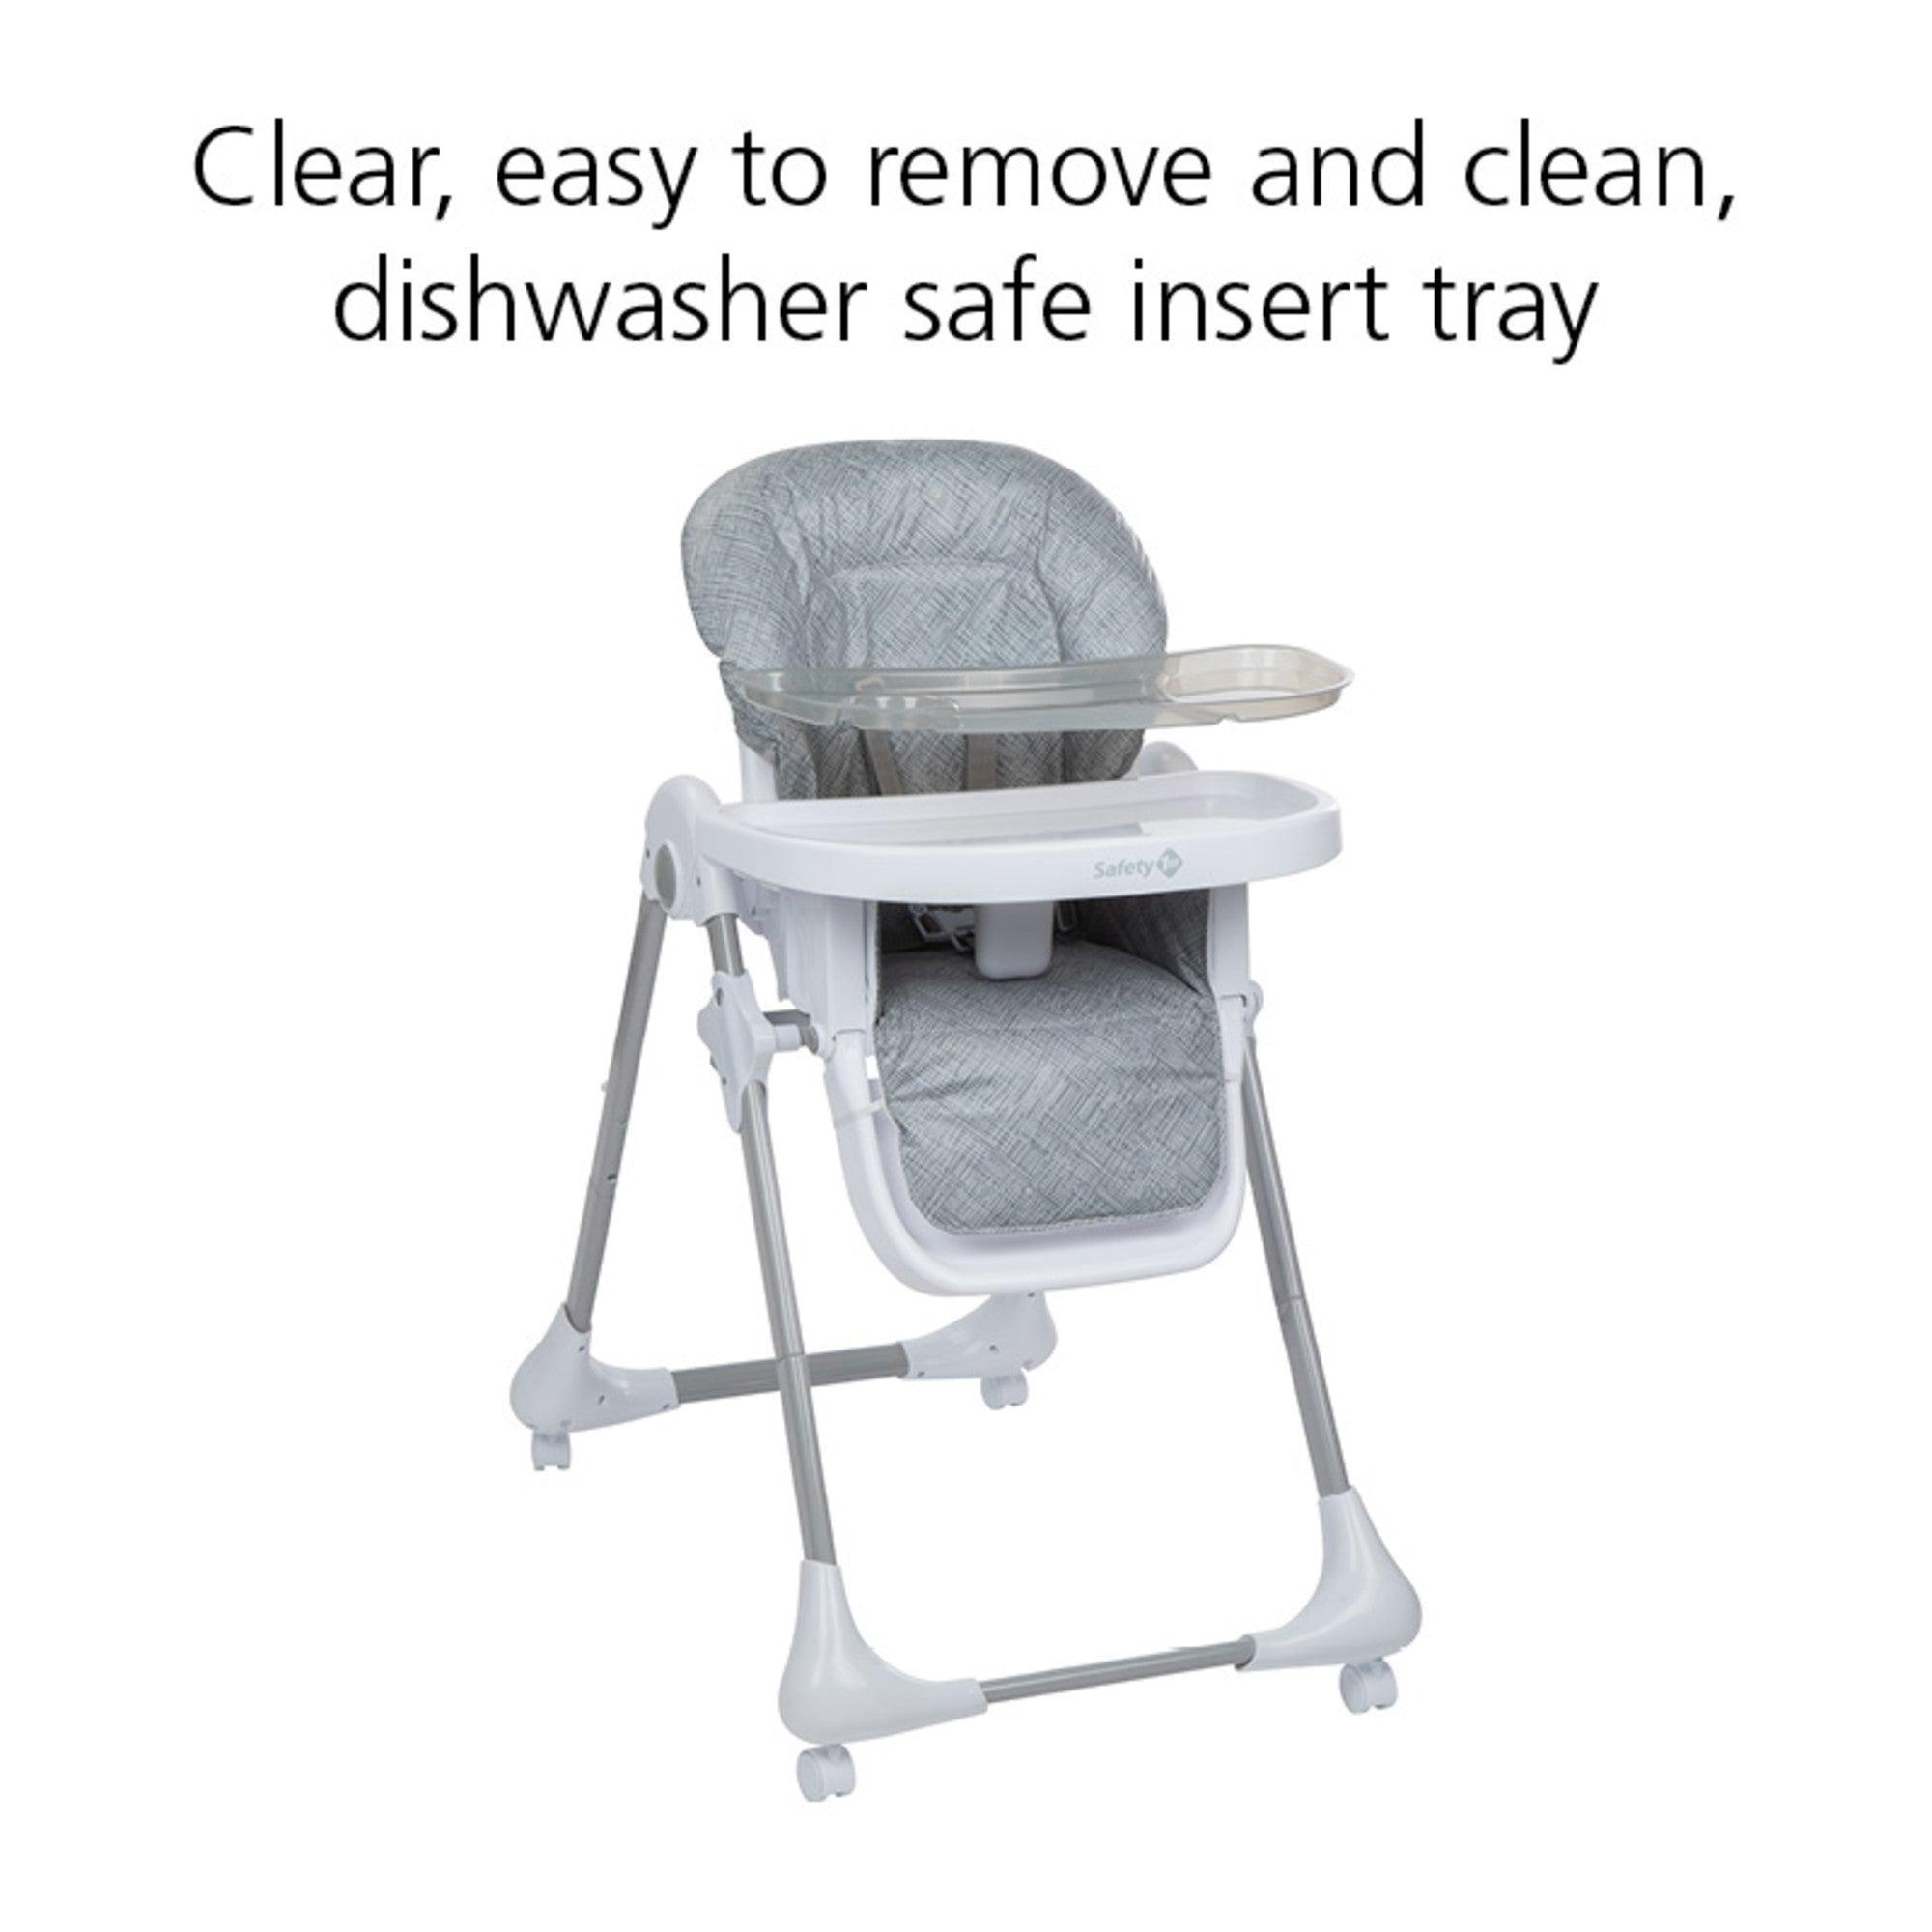 Clear, easy to remobve and clean, dishwasher safe insert tray